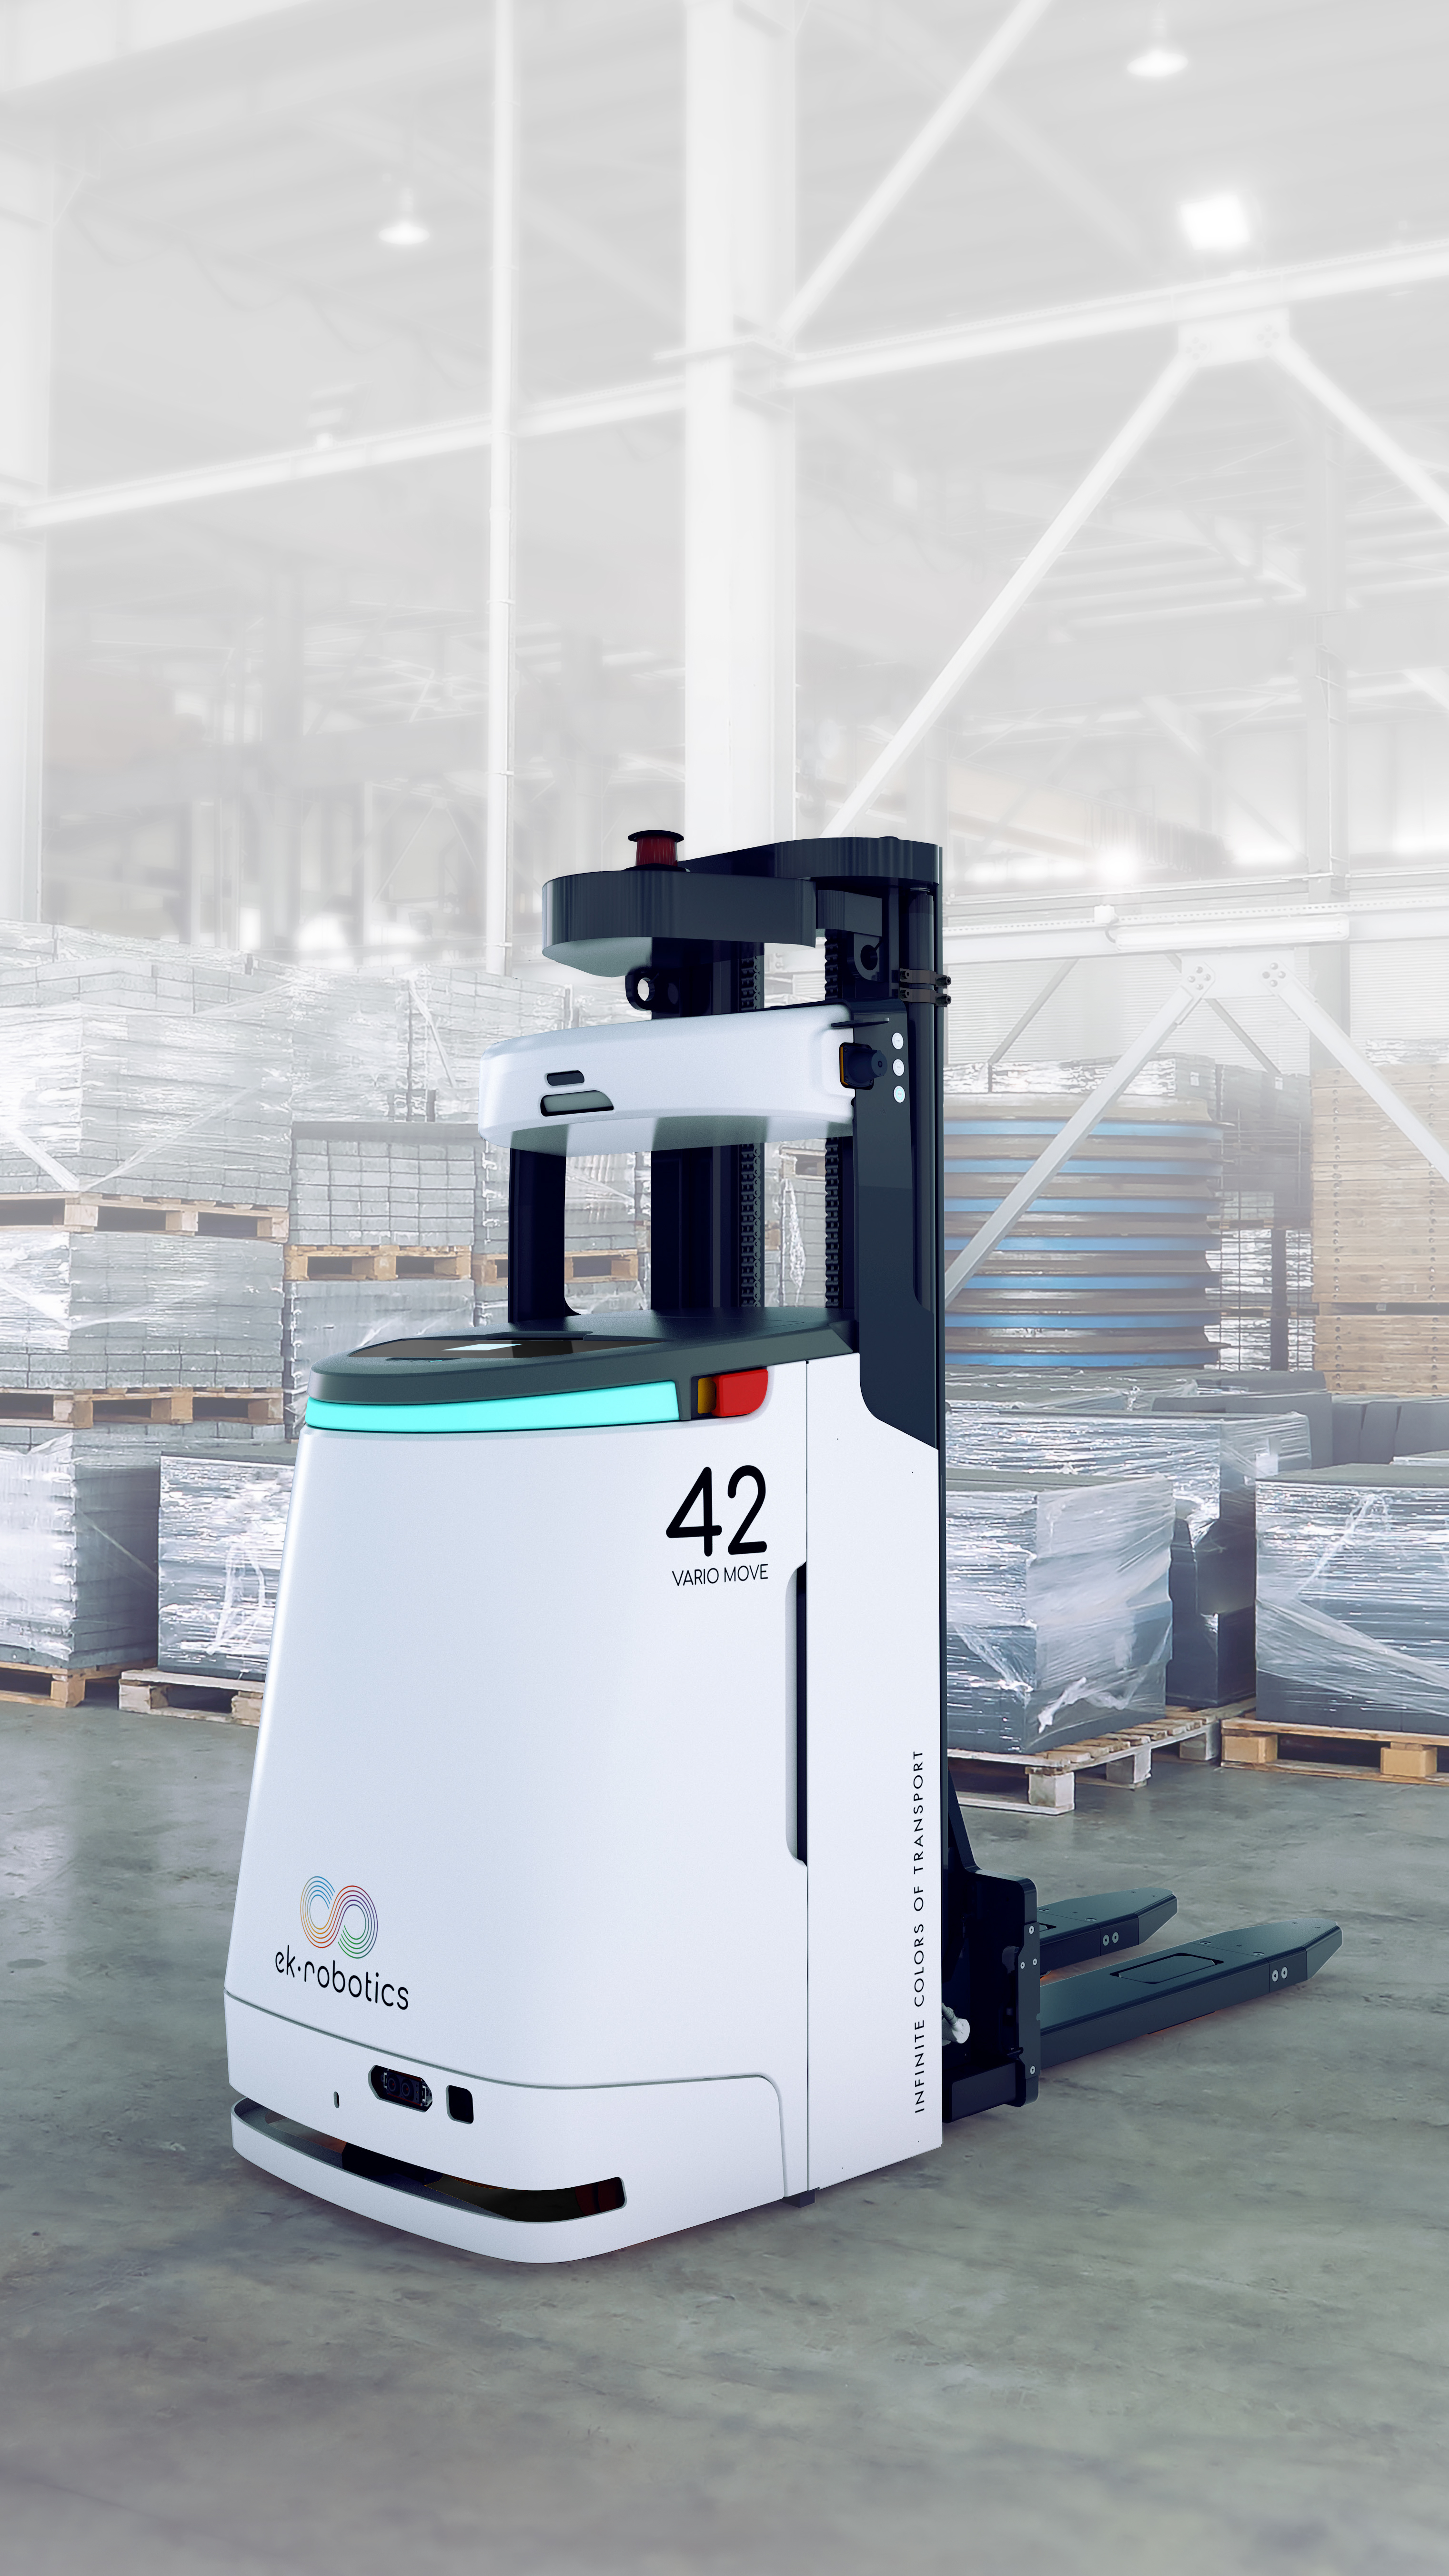 VARIO MOVE - Automated Guided Transportrobot